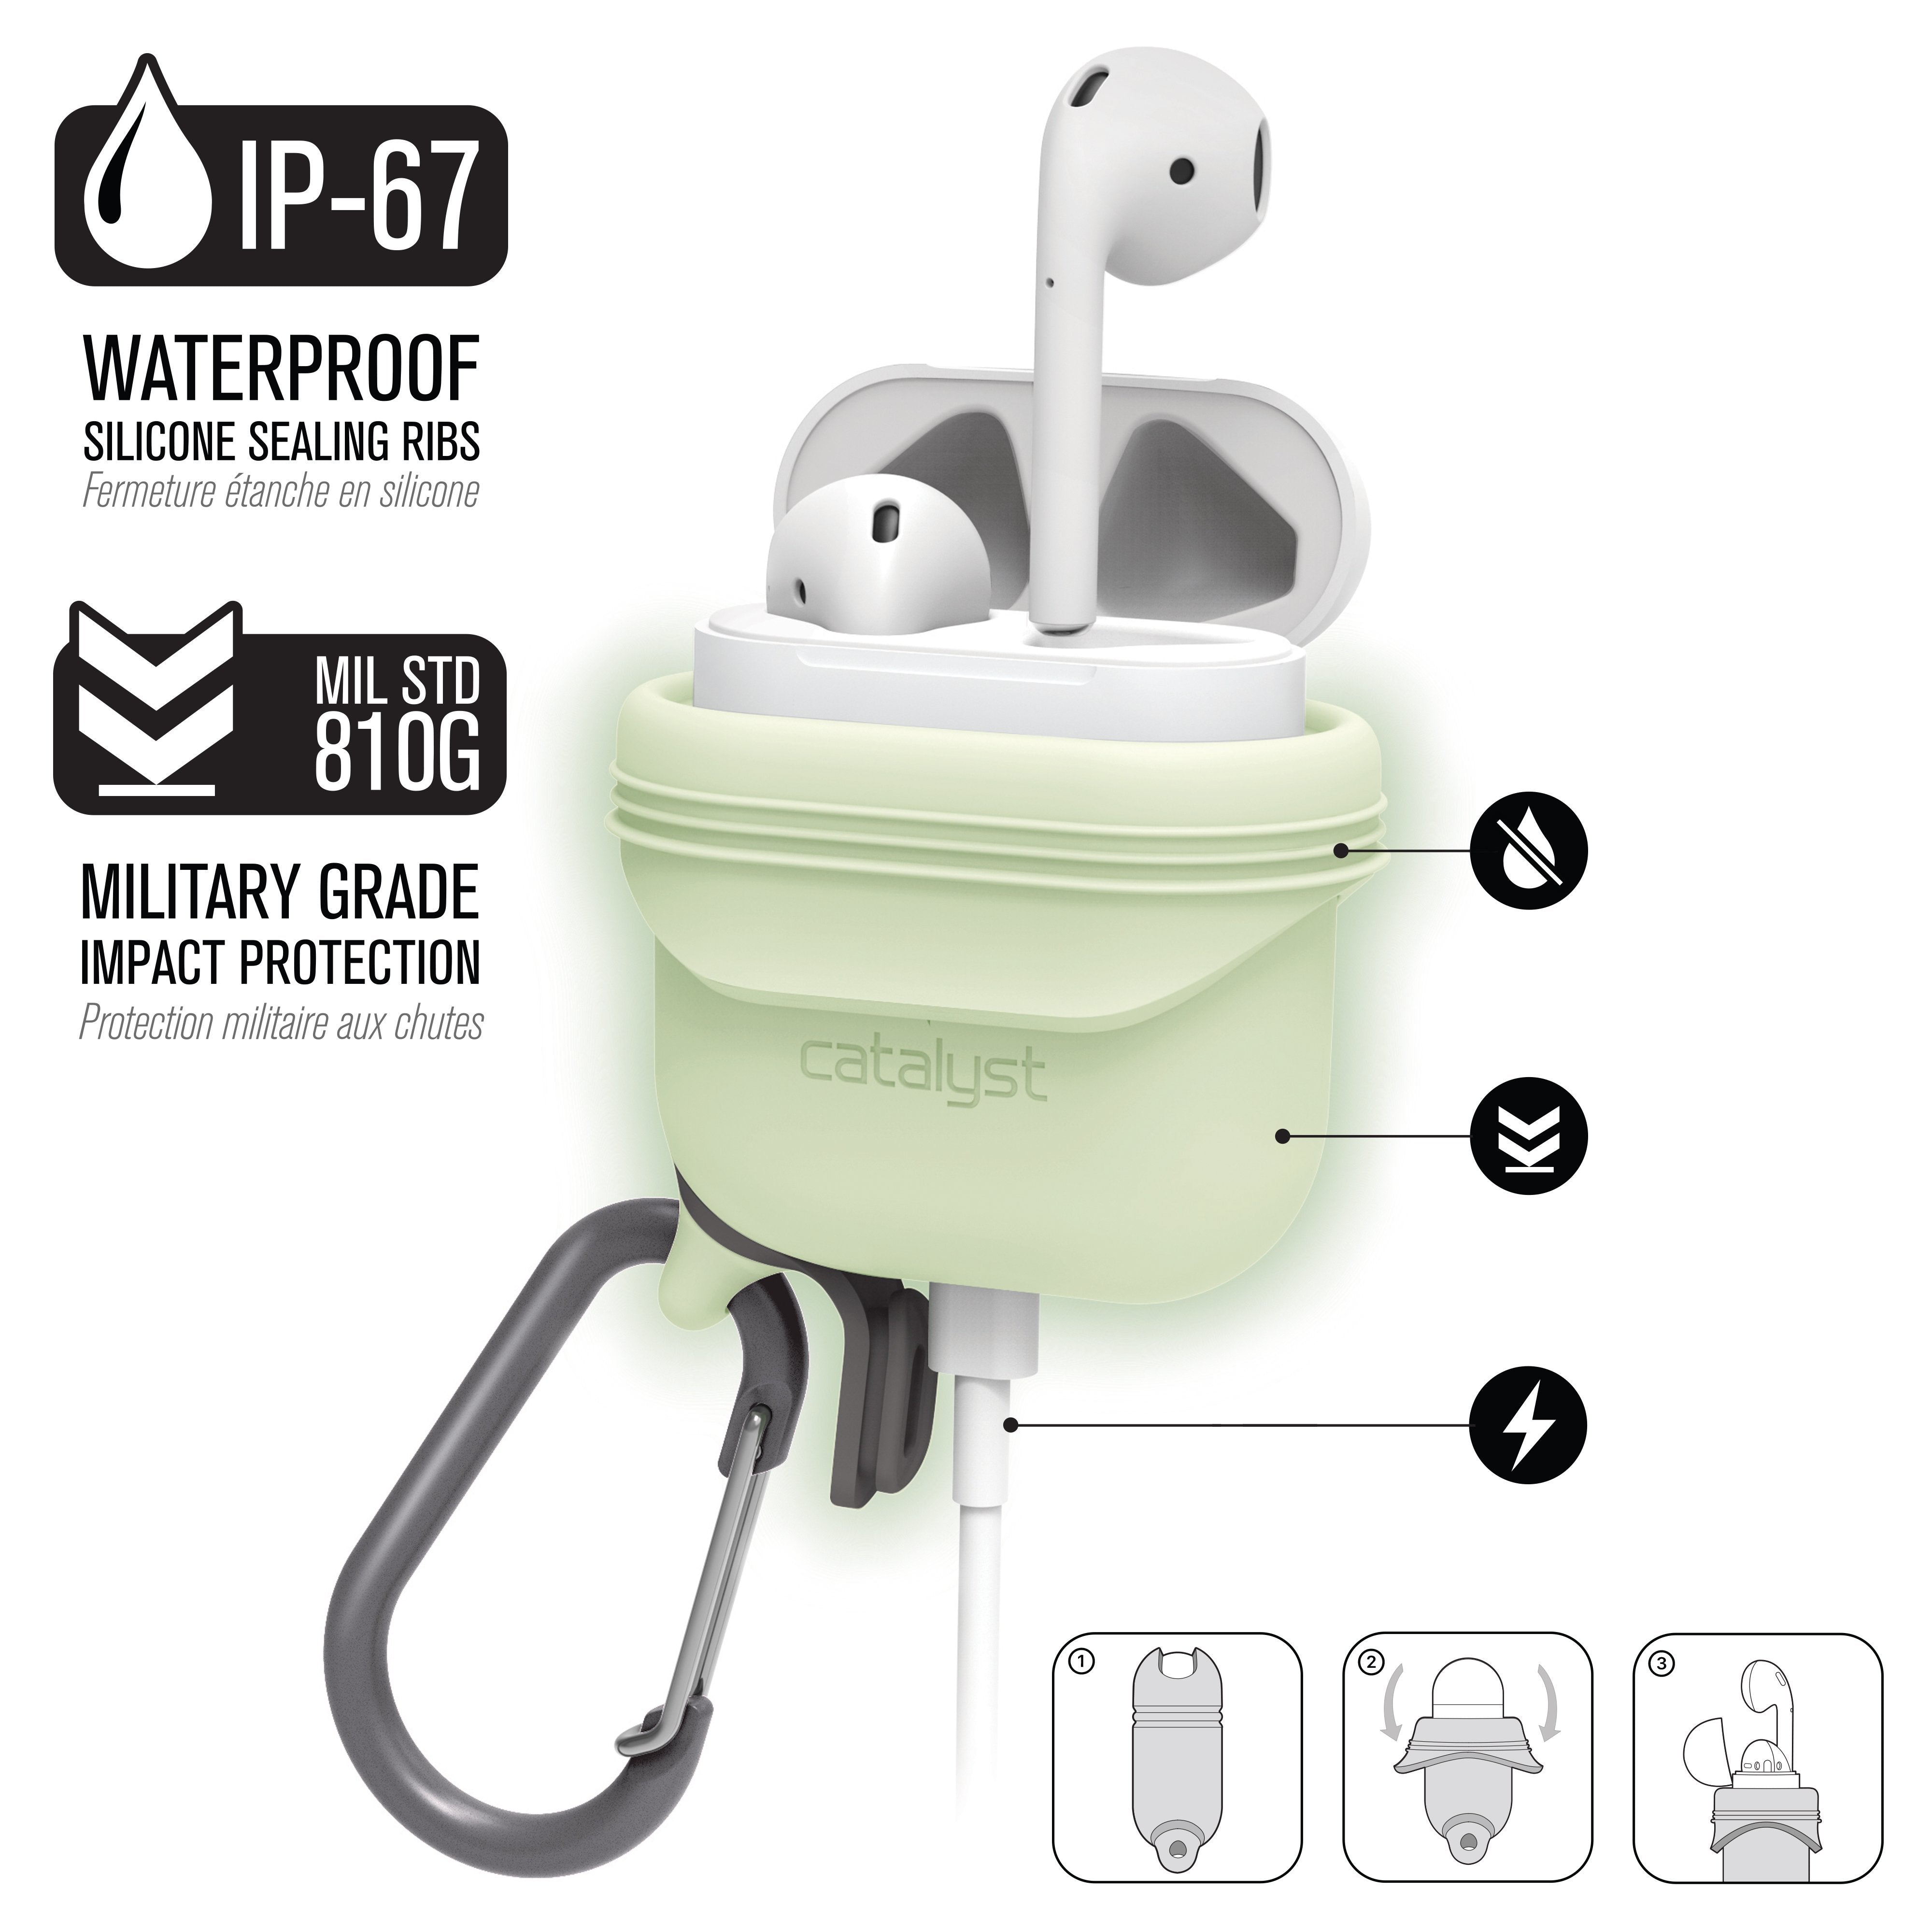 CATAPLAPDGITD | Special Edition Waterproof Case for AirPods